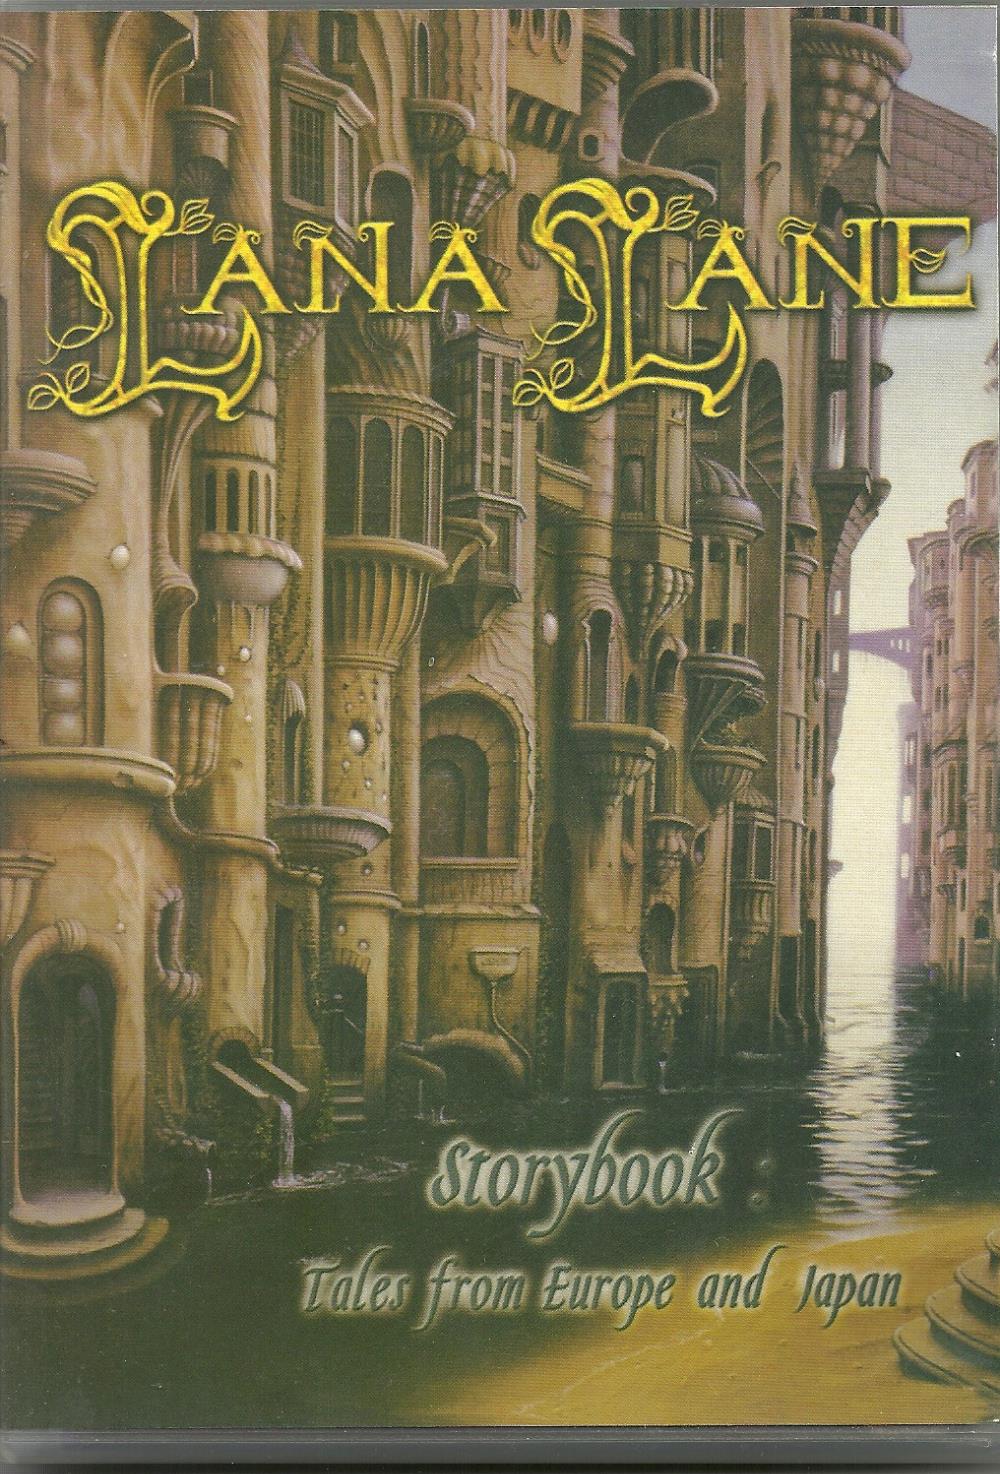  Storybook - Tales from Europe and Japan by LANE, LANA album cover